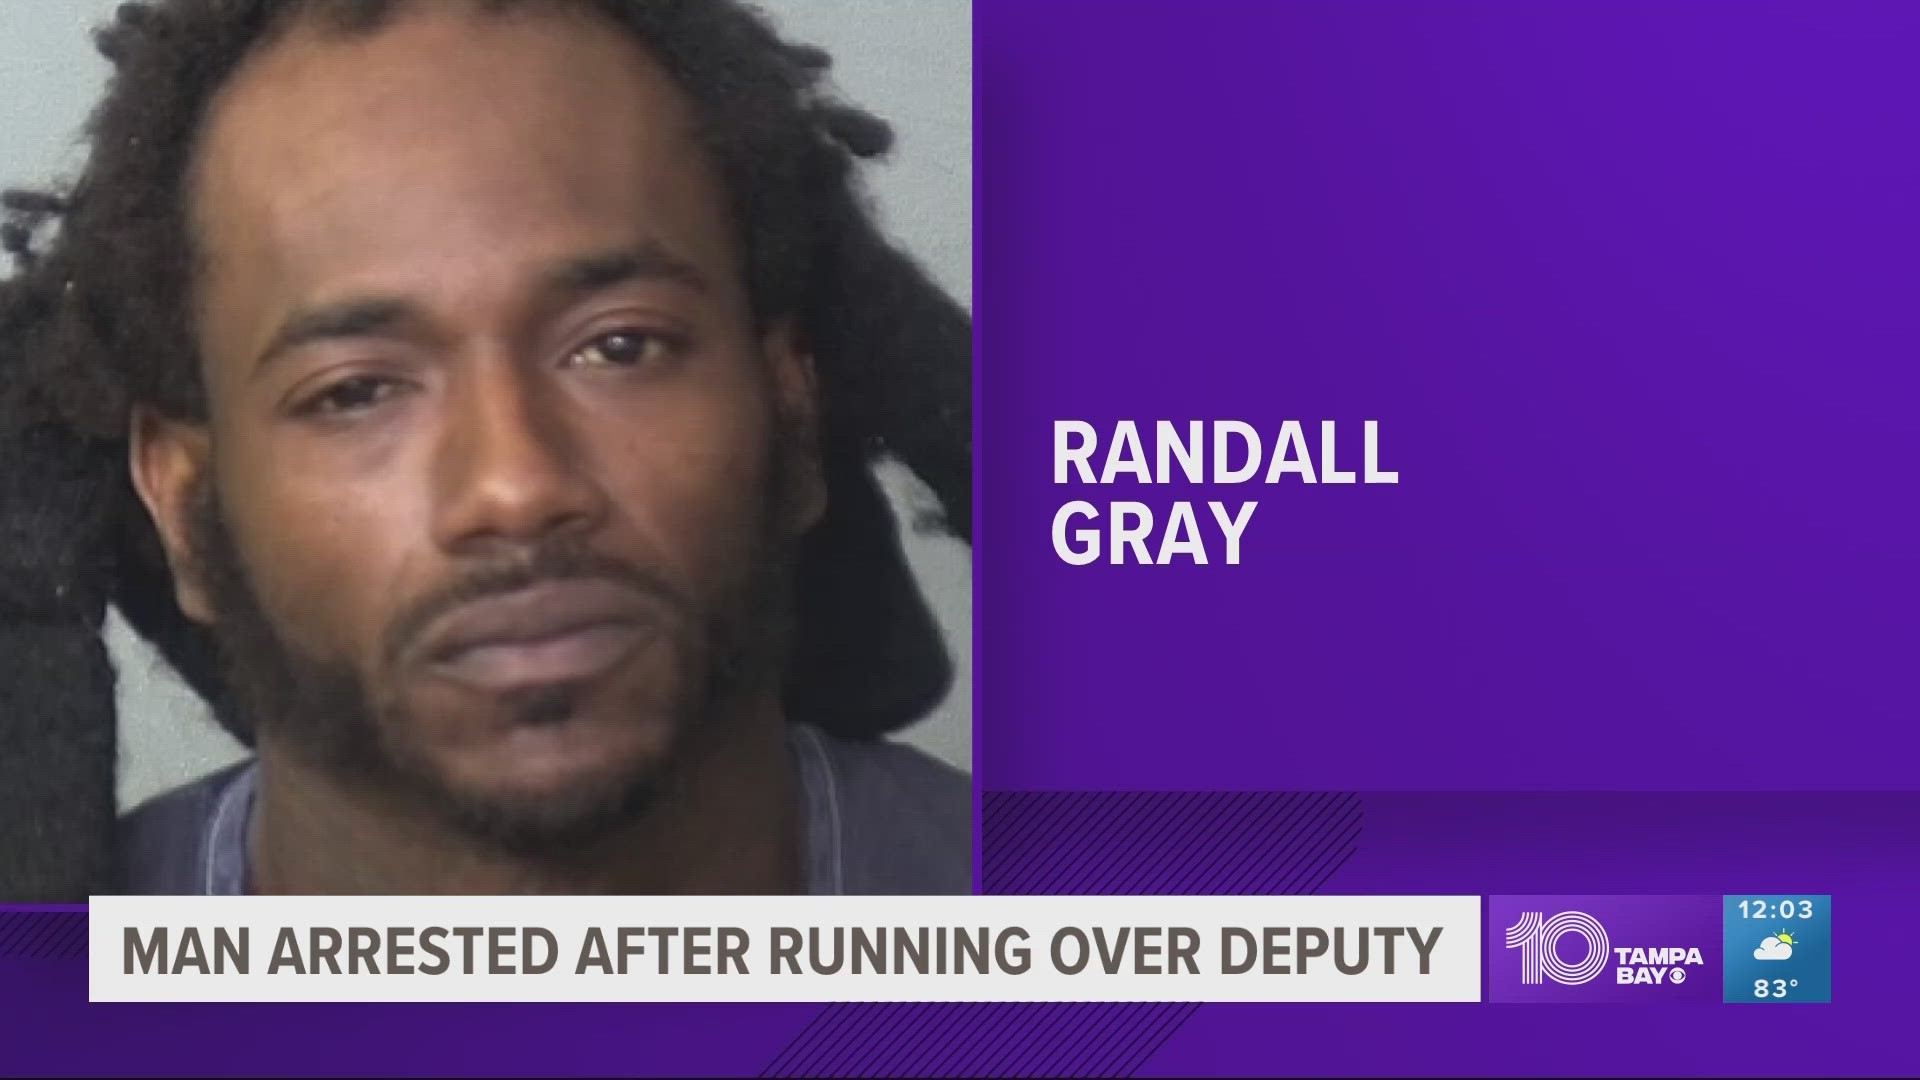 Randall Gray, who reportedly is a longtime convicted felon, is charged with attempted murder of a law enforcement officer.